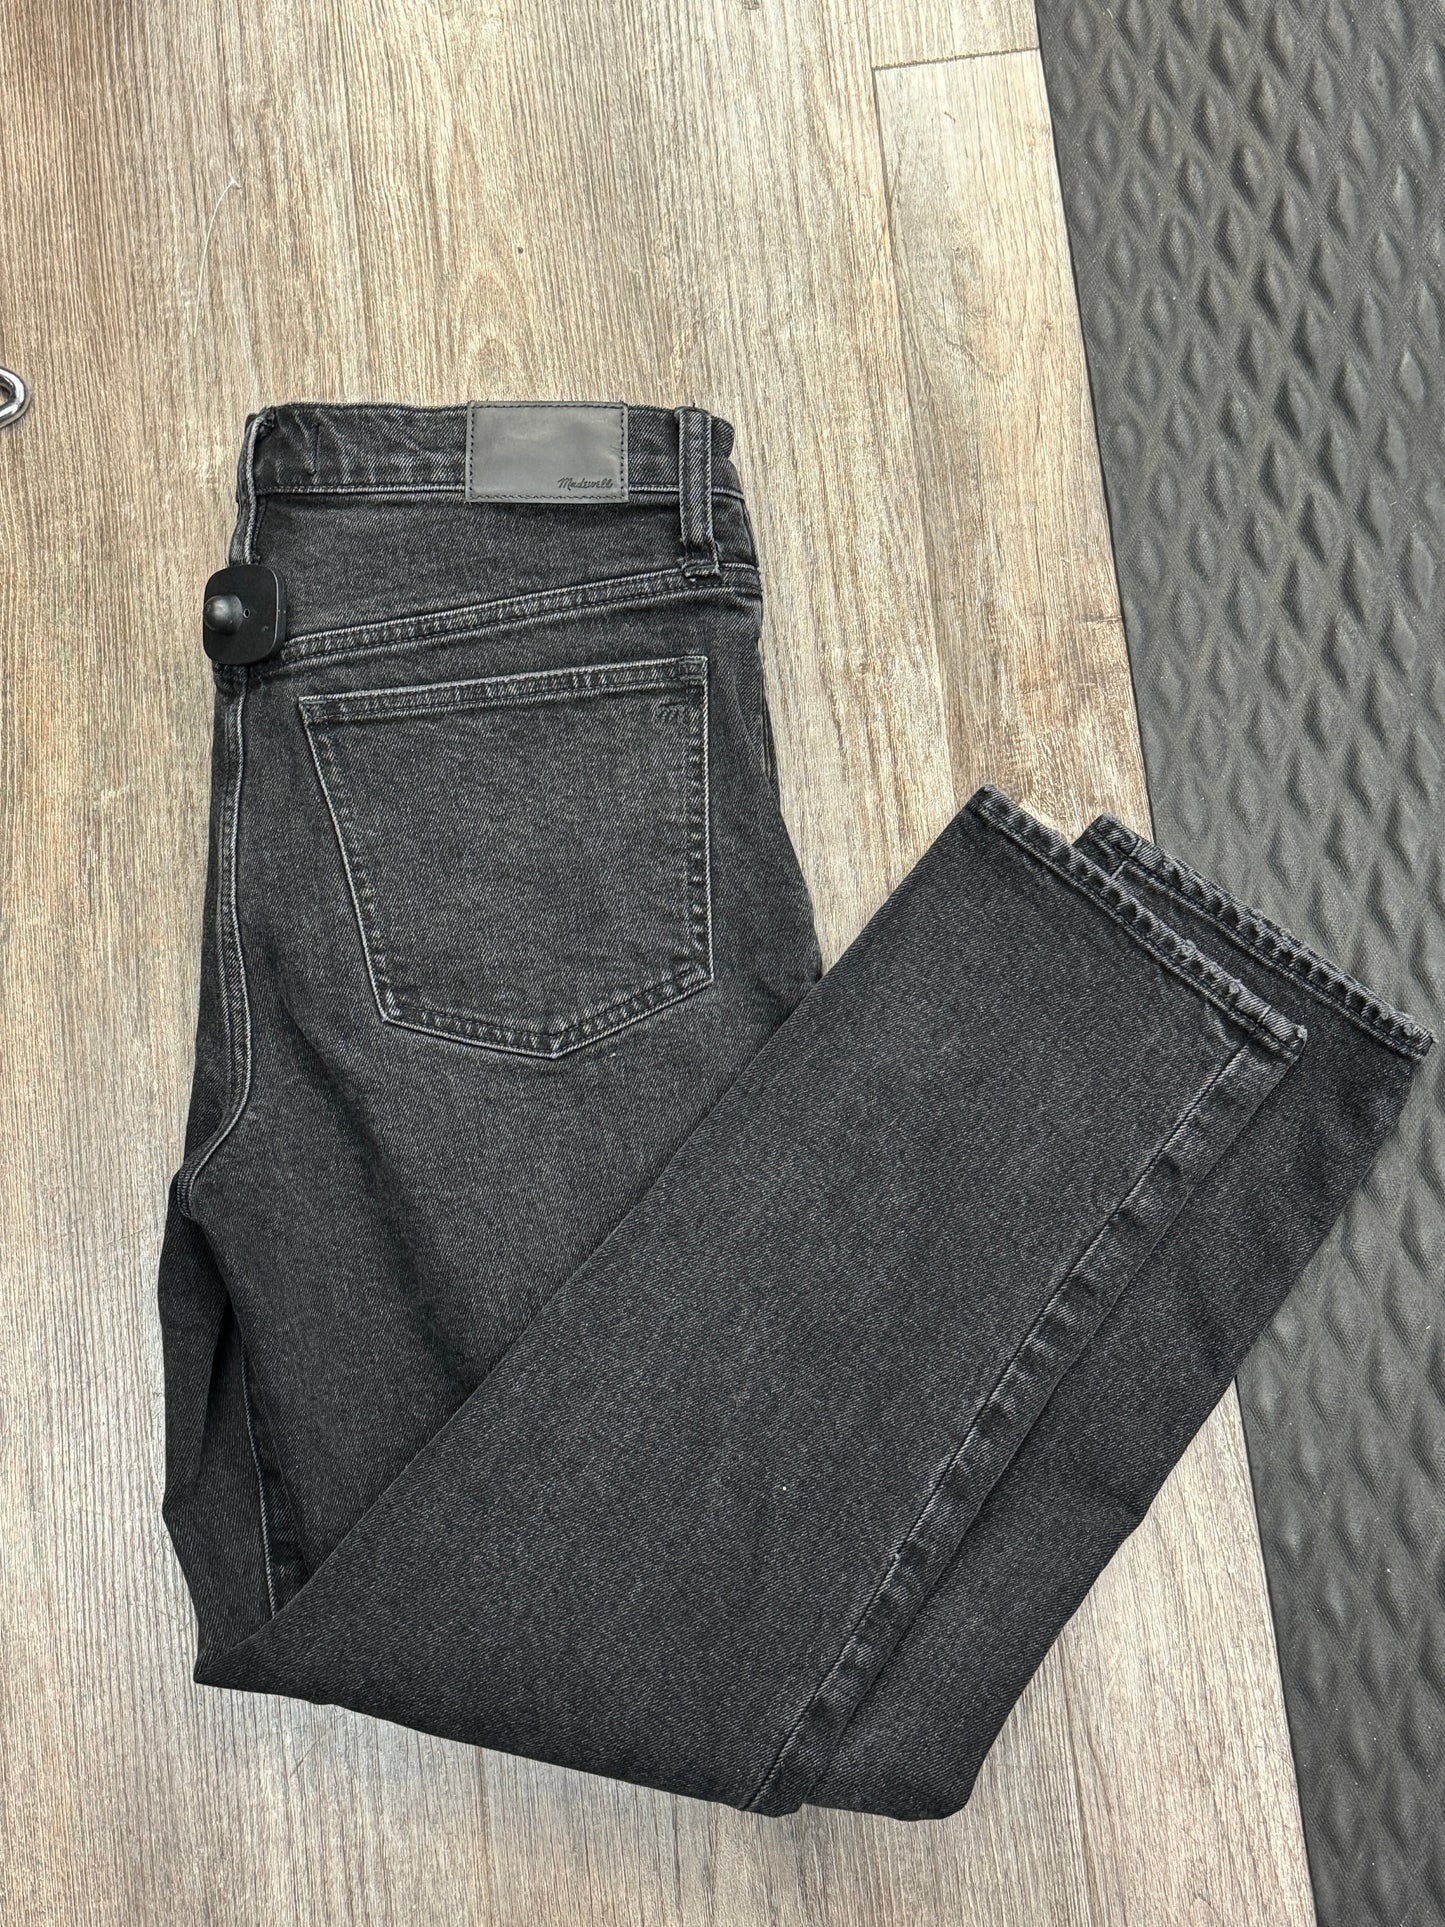 Jeans Skinny By Madewell  Size: 6